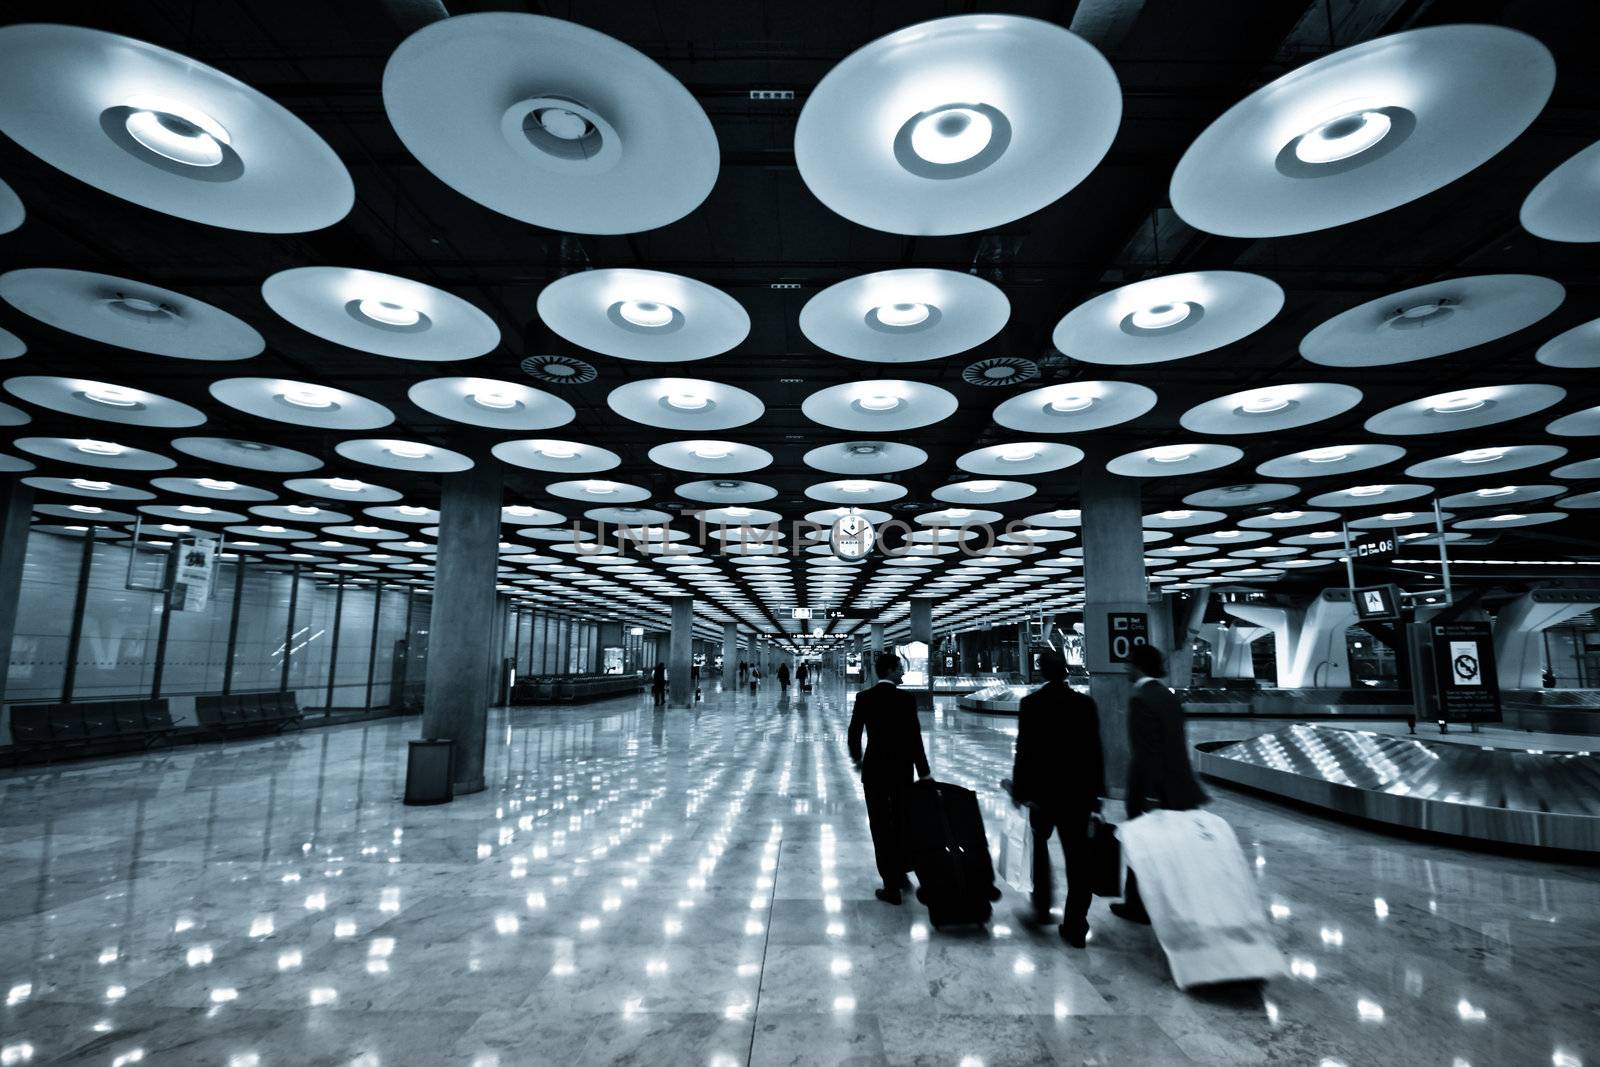 Futuristic design of the arrival hall of the Barajas airport - Madrid, Spain